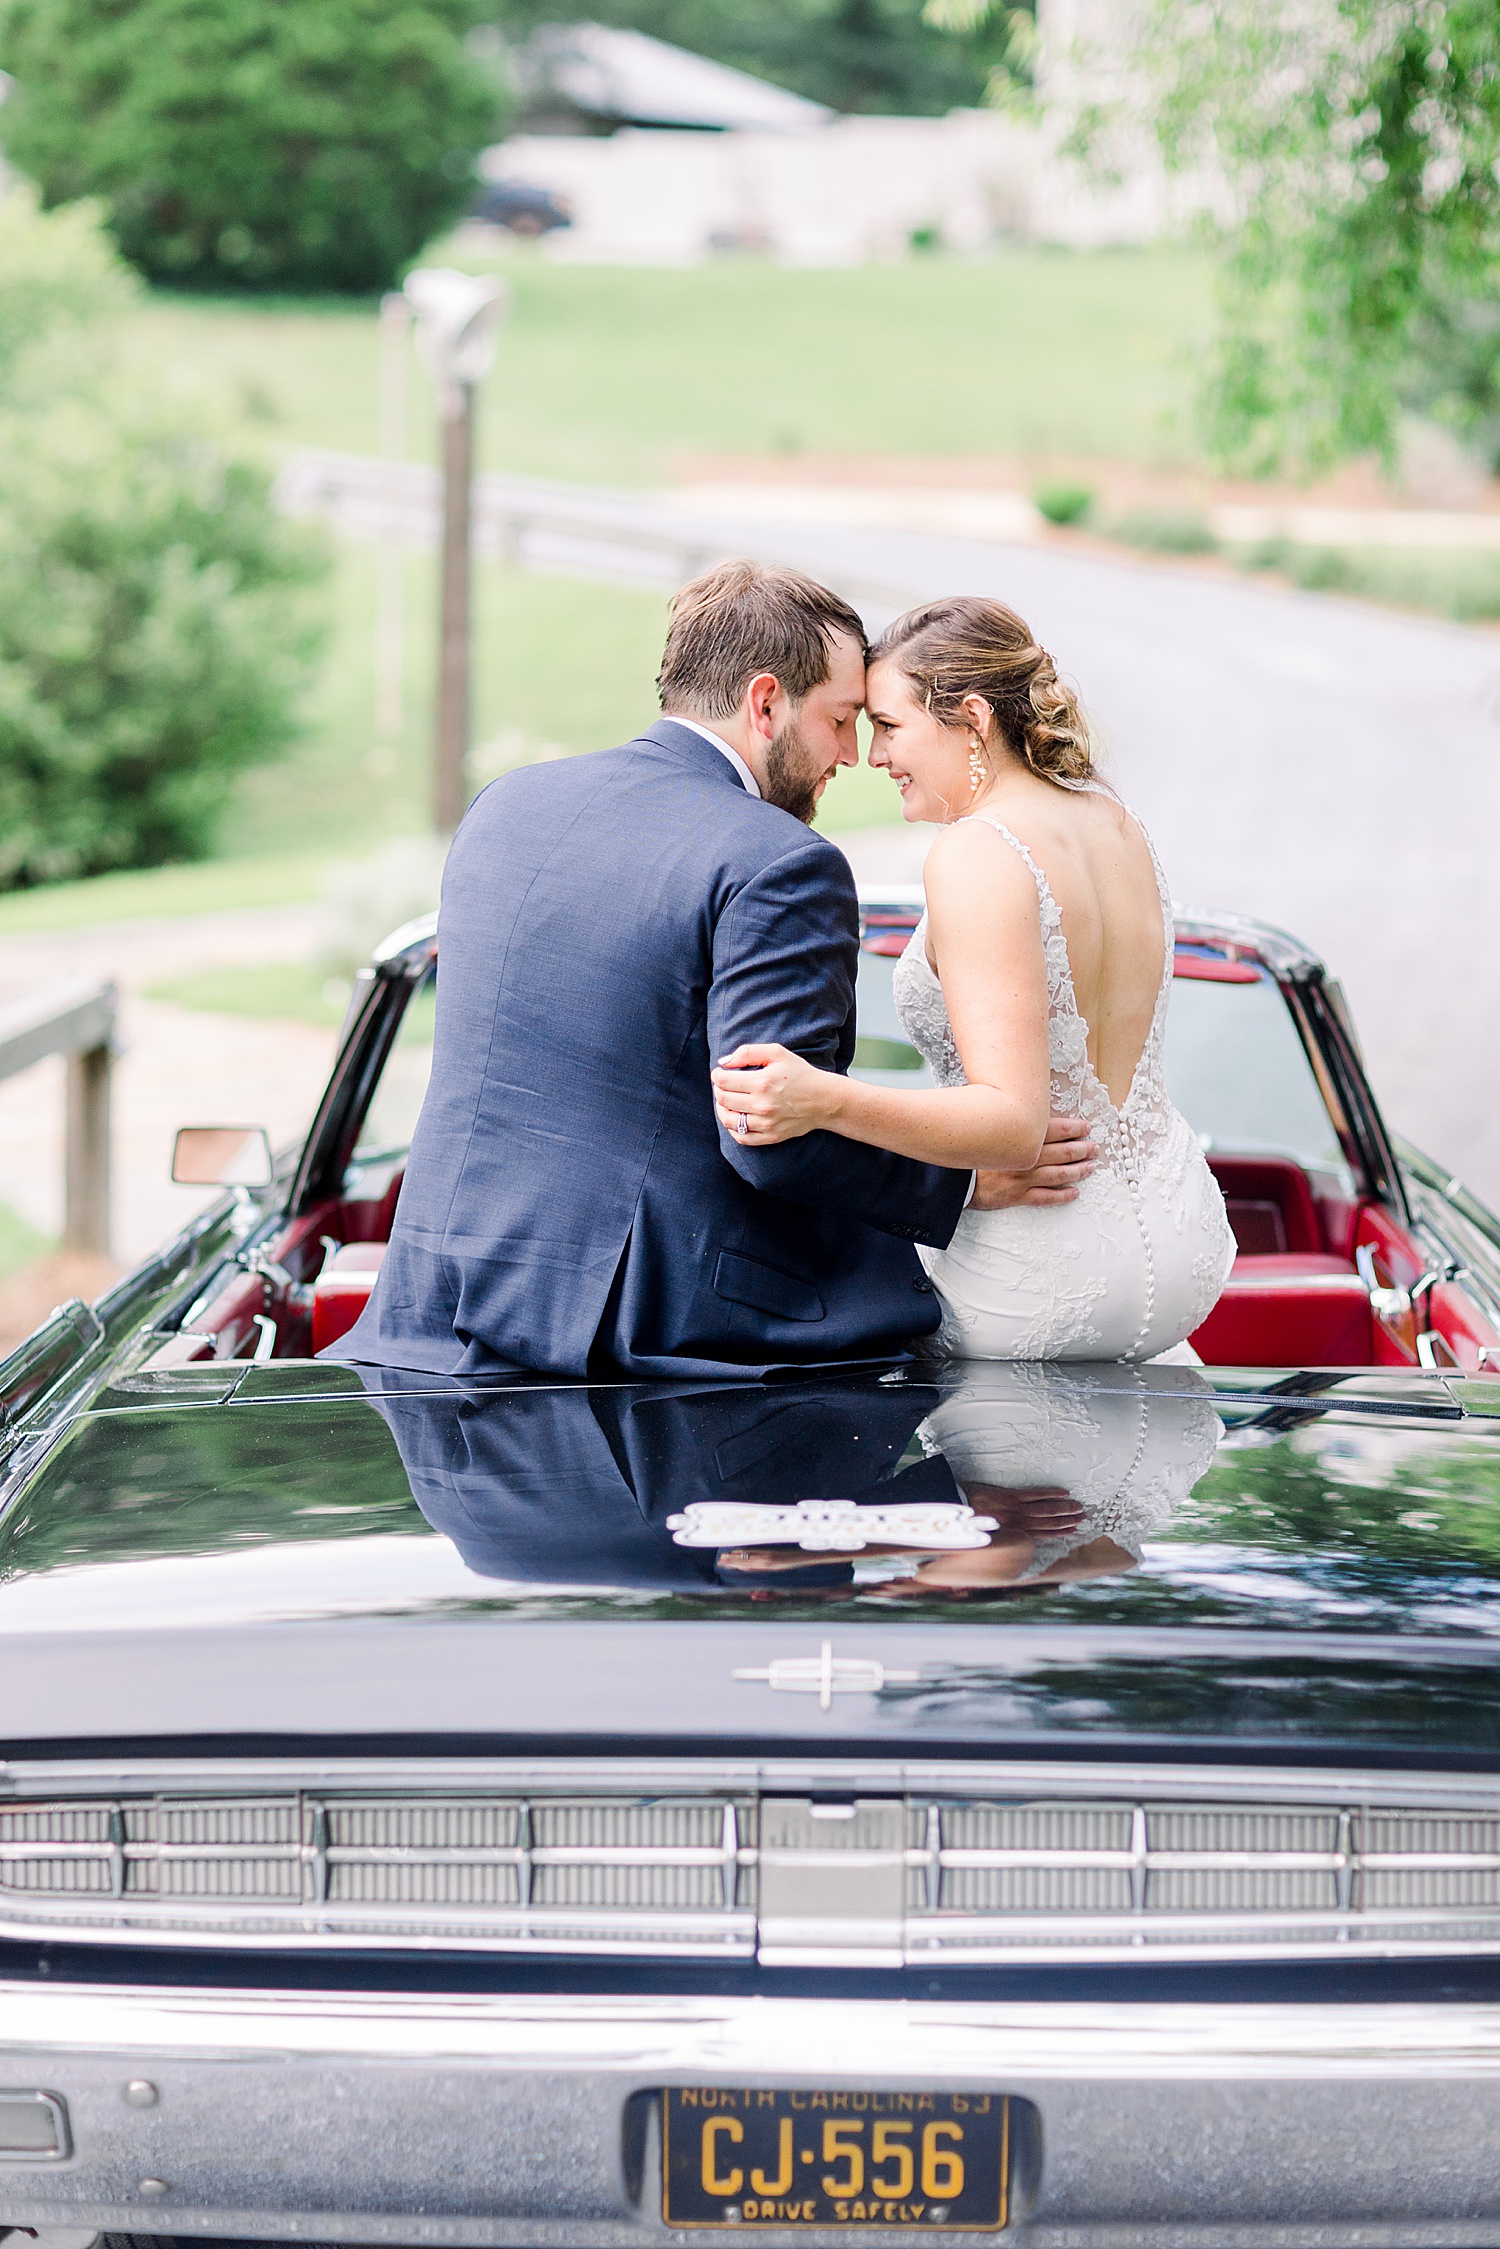 newlyweds sit on classic car from Coats Cars